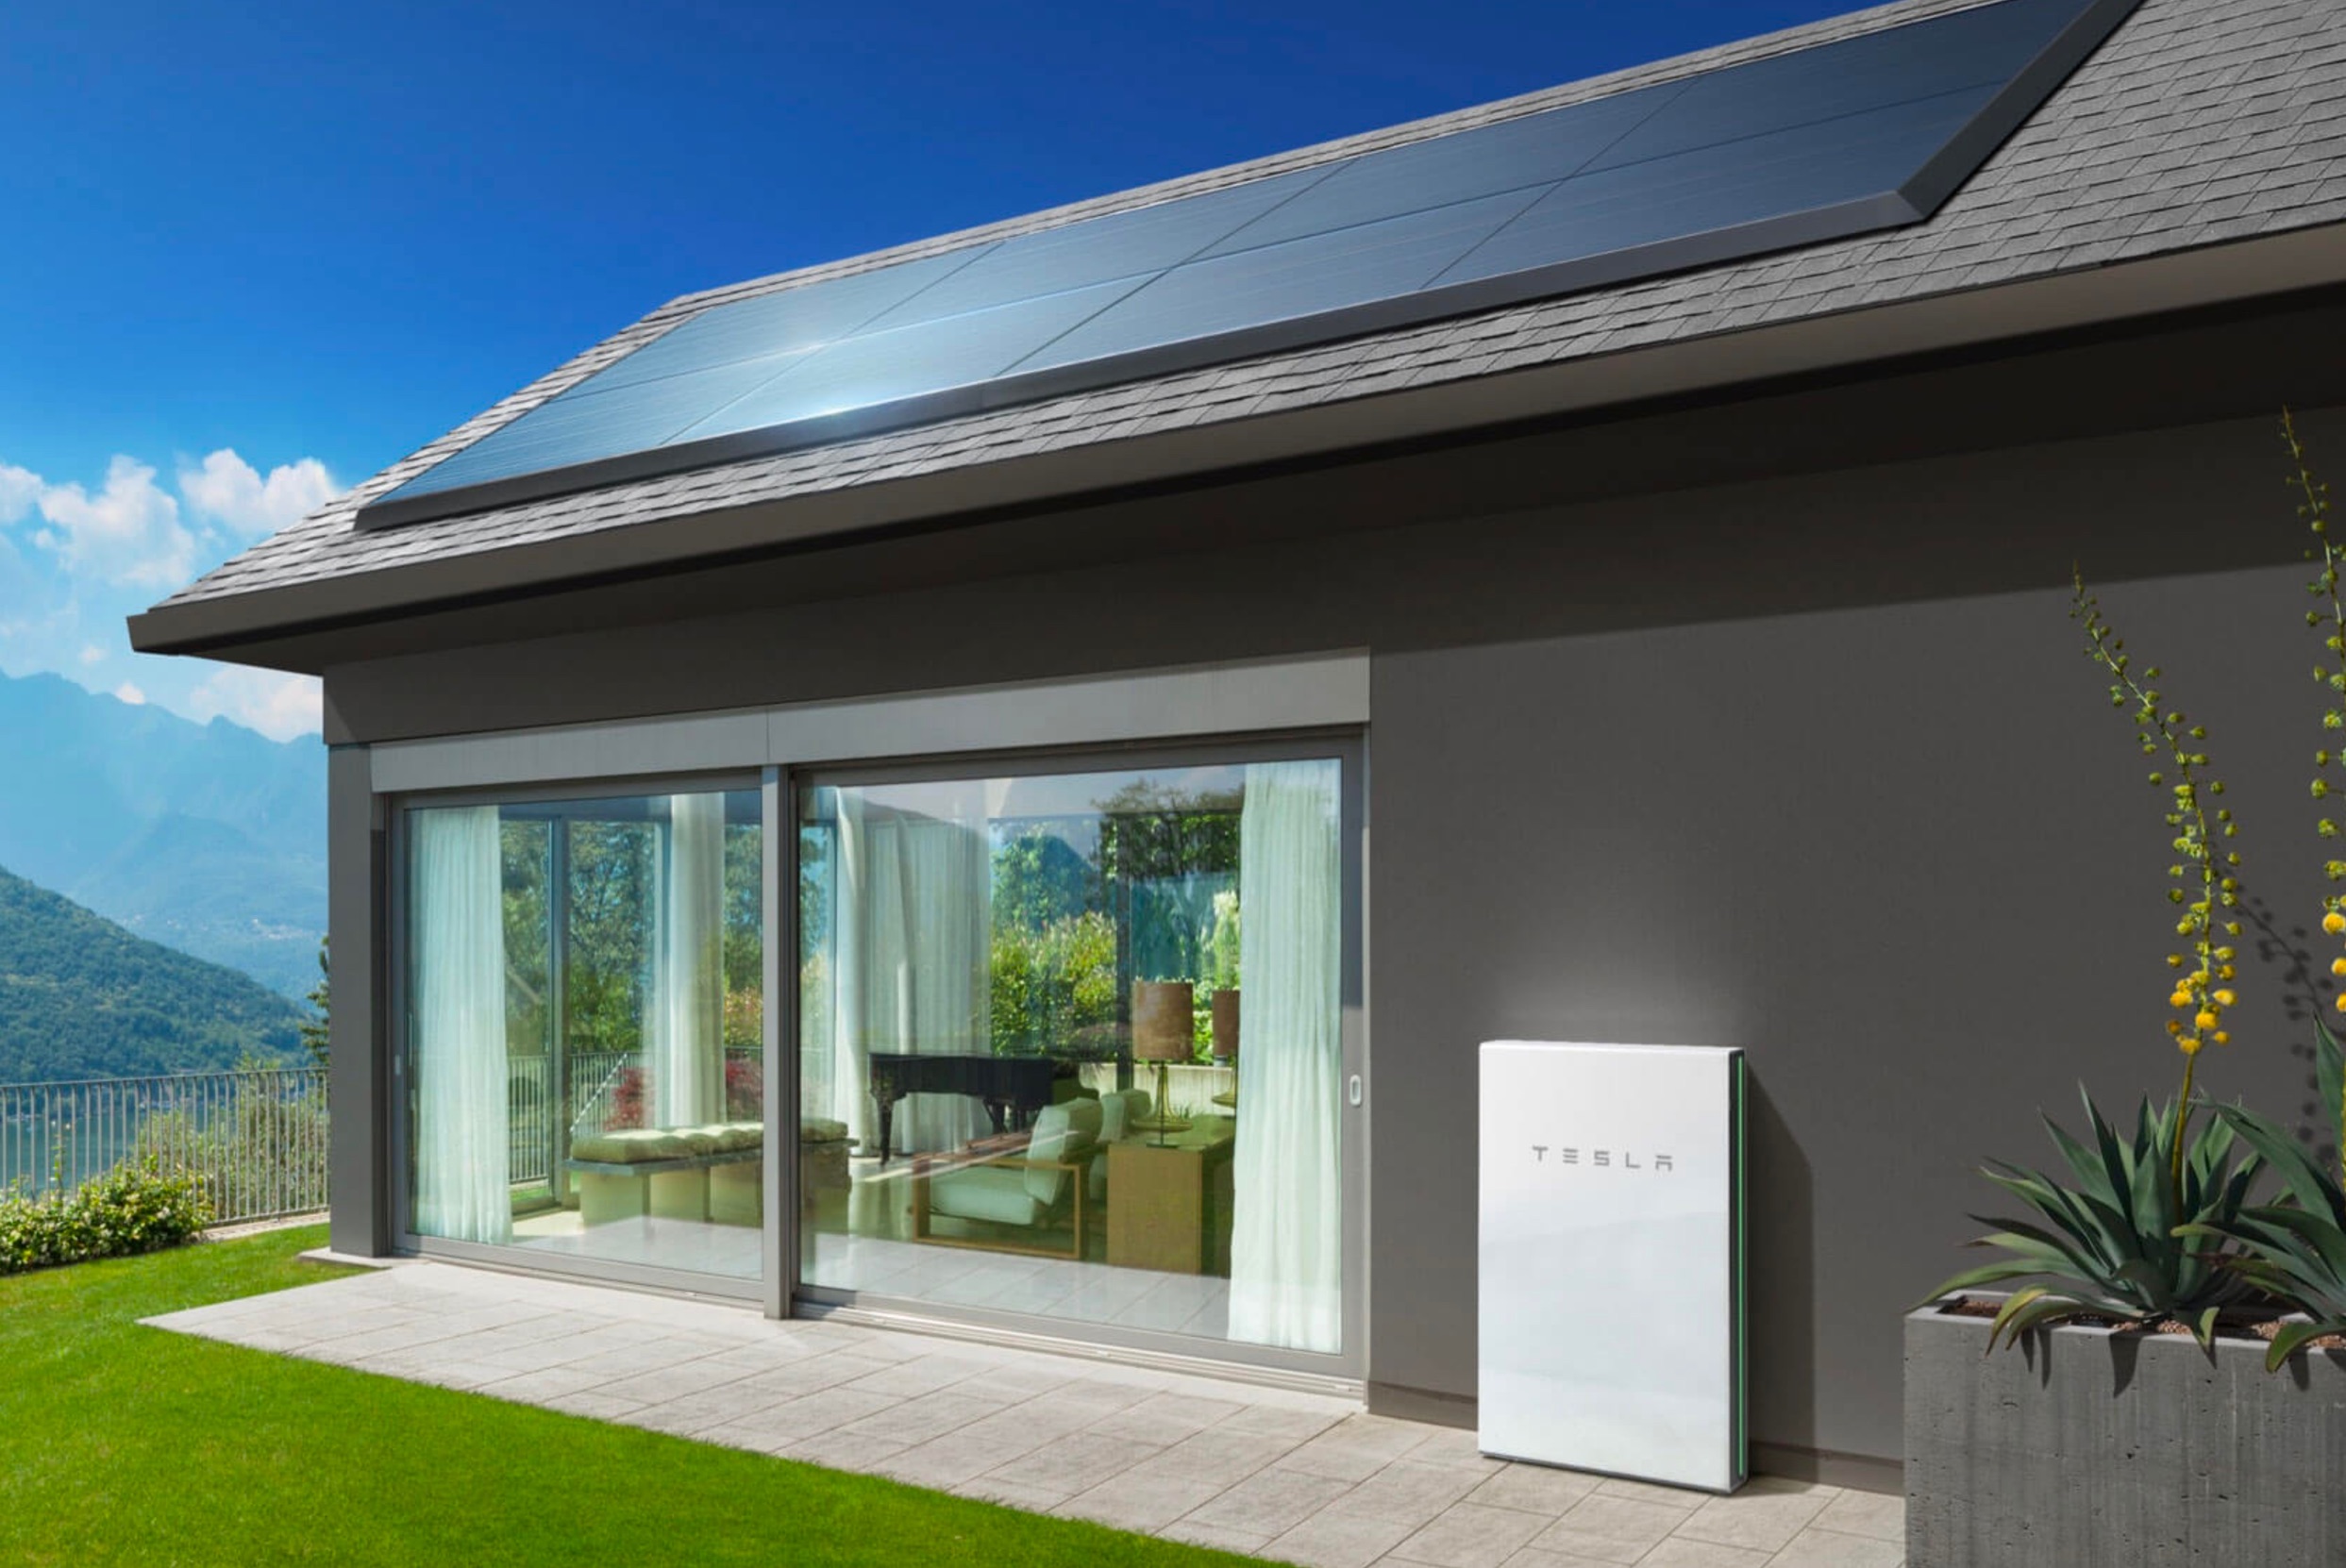 Tesla shifts solar division goals to focus on profitability over MW deployed